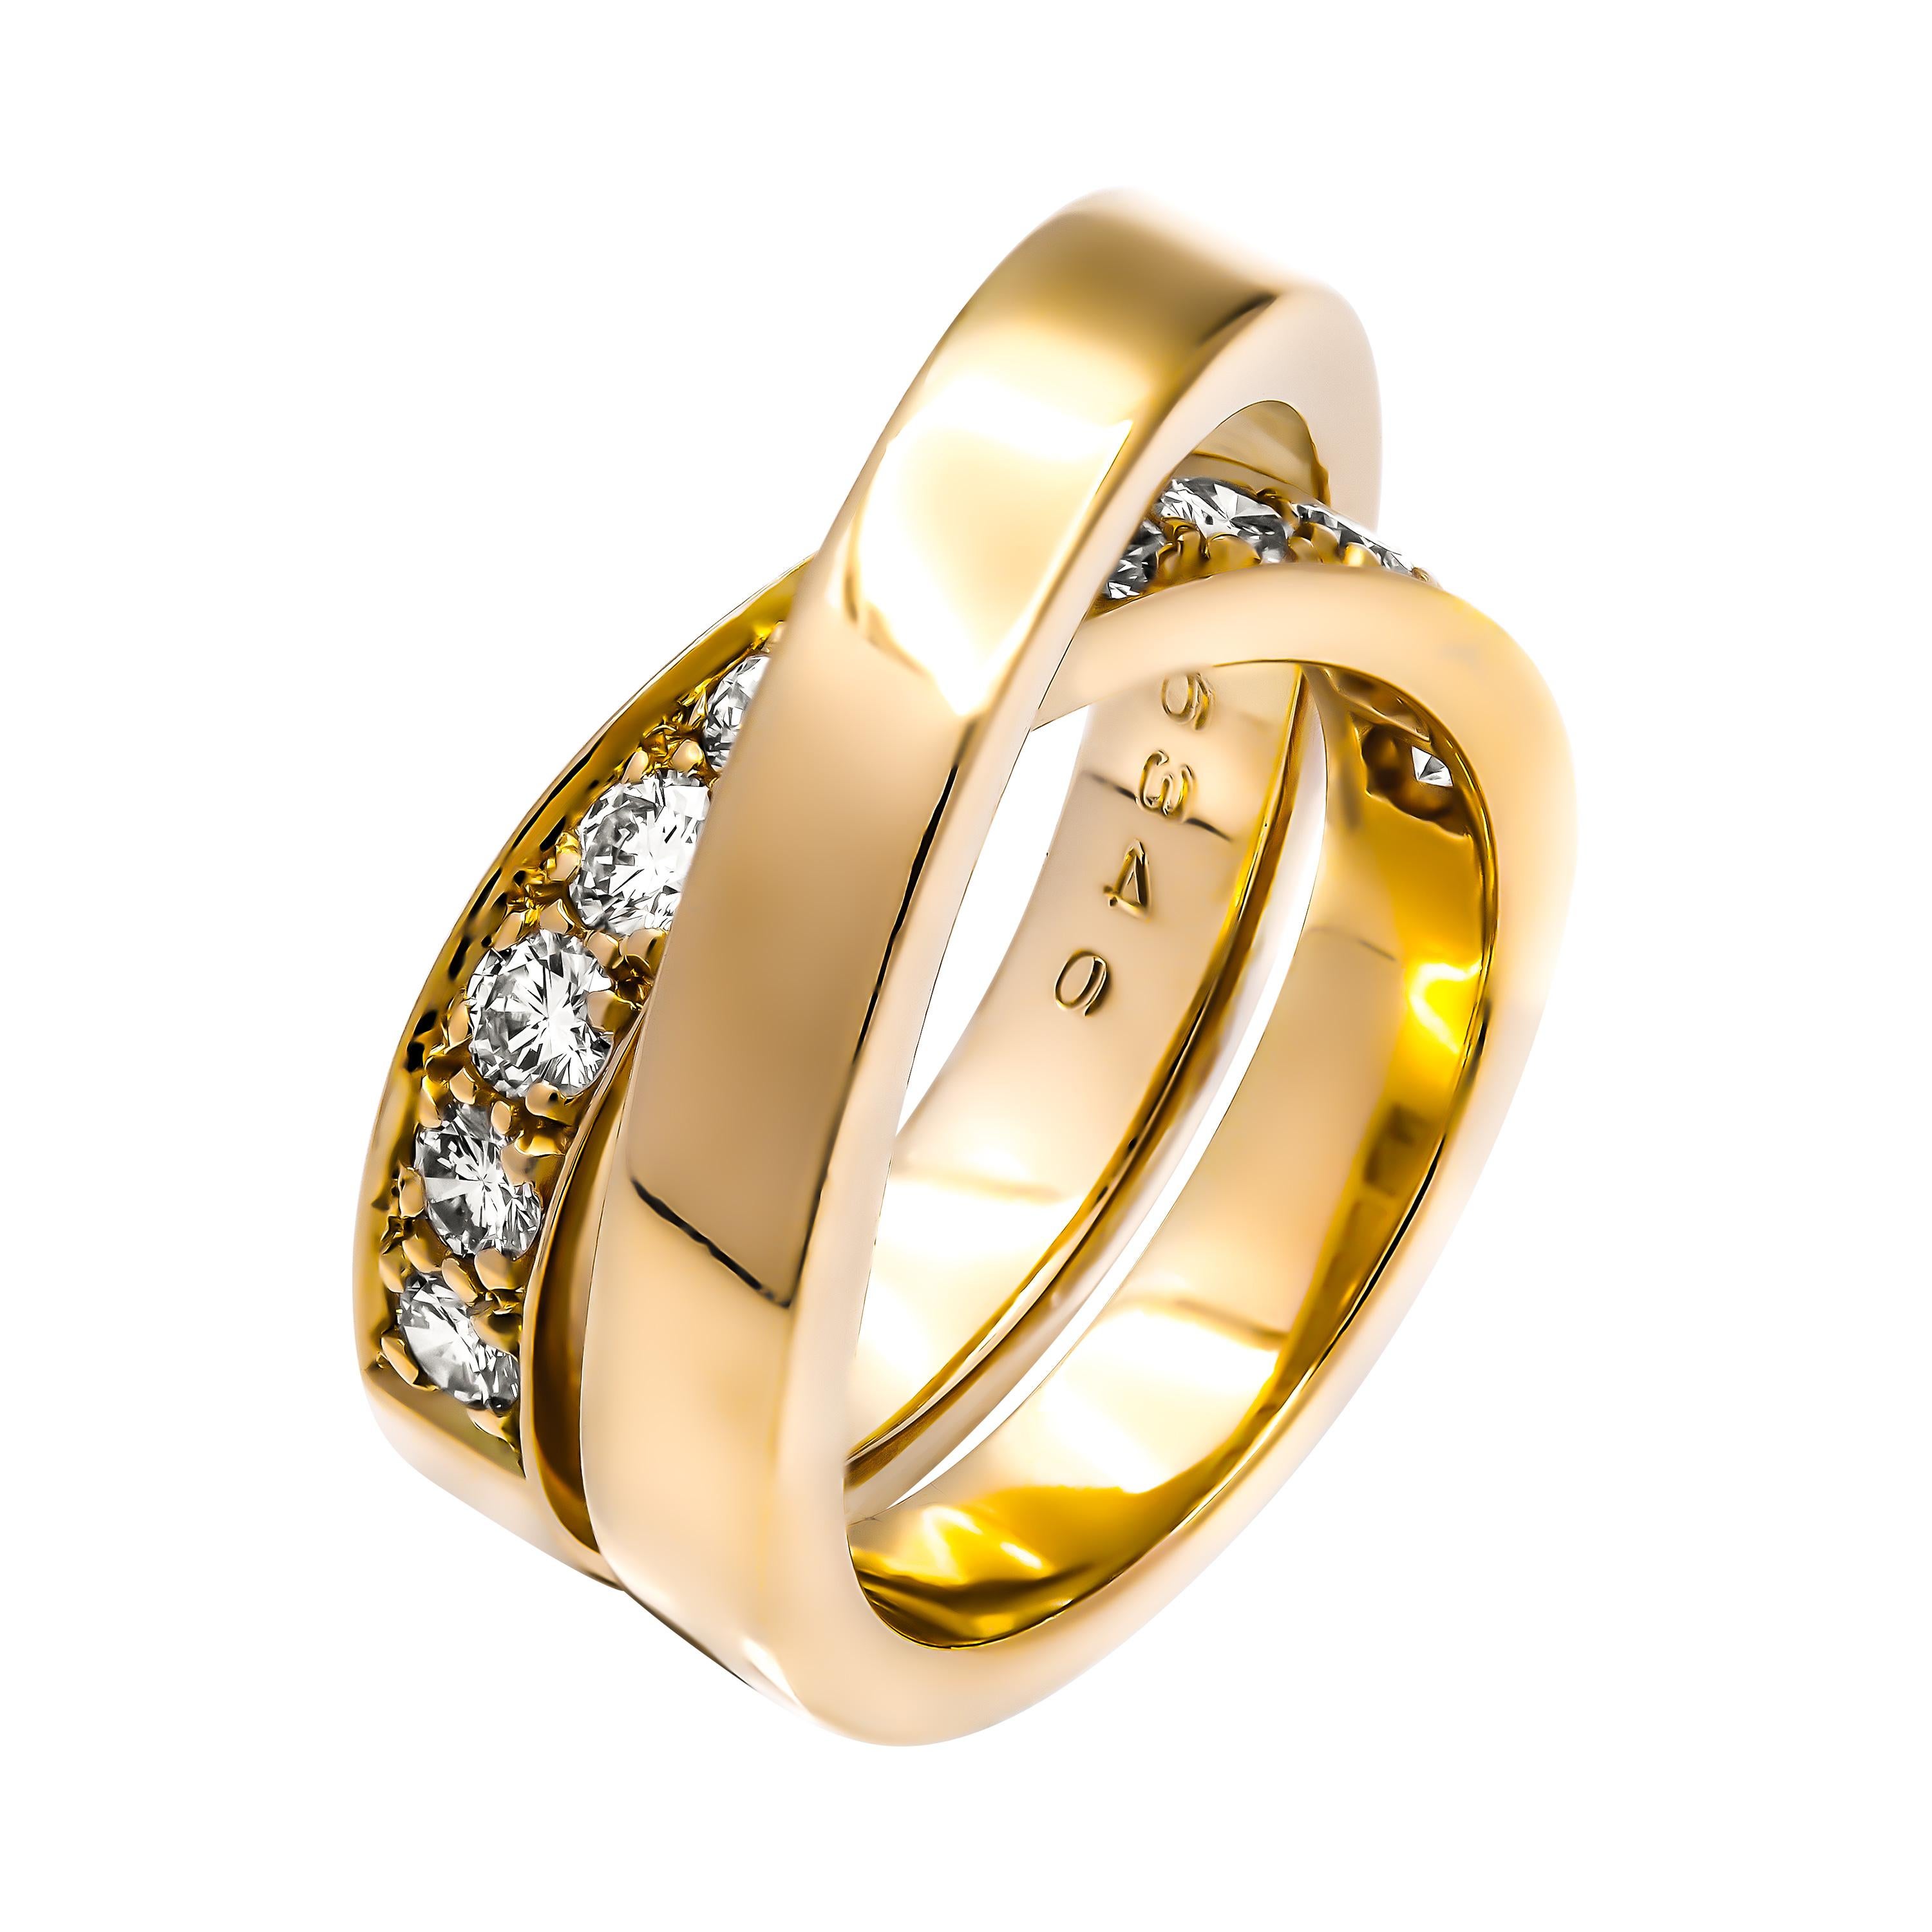 AUTHENTIC ETINCELLE DE CARTIER RING
Metal: 18K YELLOW GOLD
TCW of diamonds: 1.20CT 
Color: G
Clarity: VS1
Size: 52 
Engraved w/ original hallmark & individual serial number
Ring Measurements:
Band Thickness: 4.87mm at the thinnest point where twists